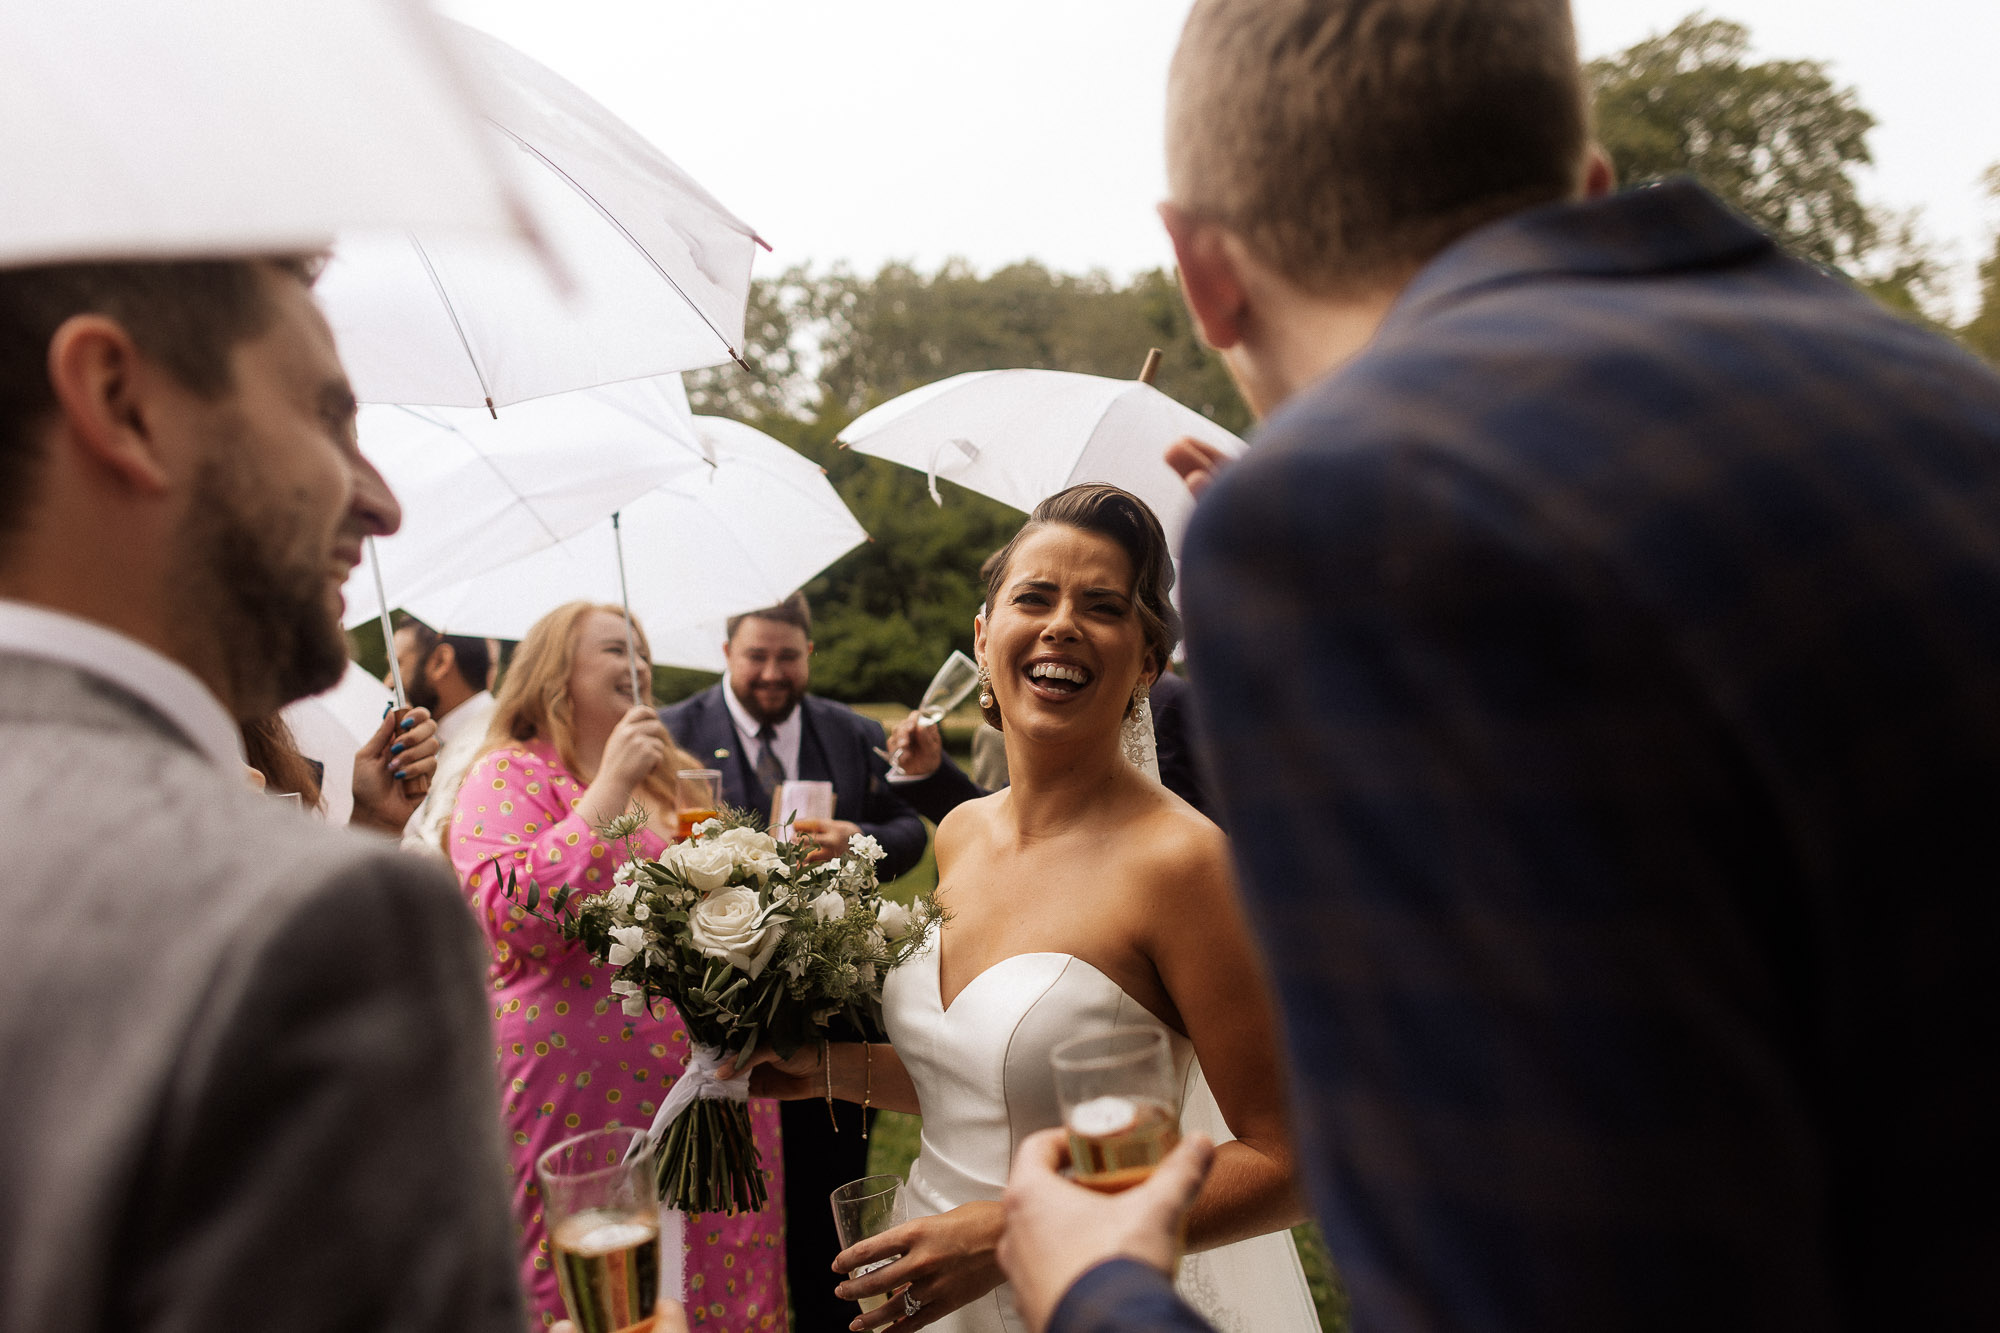 candid shot of bride laughing during cocktail hour